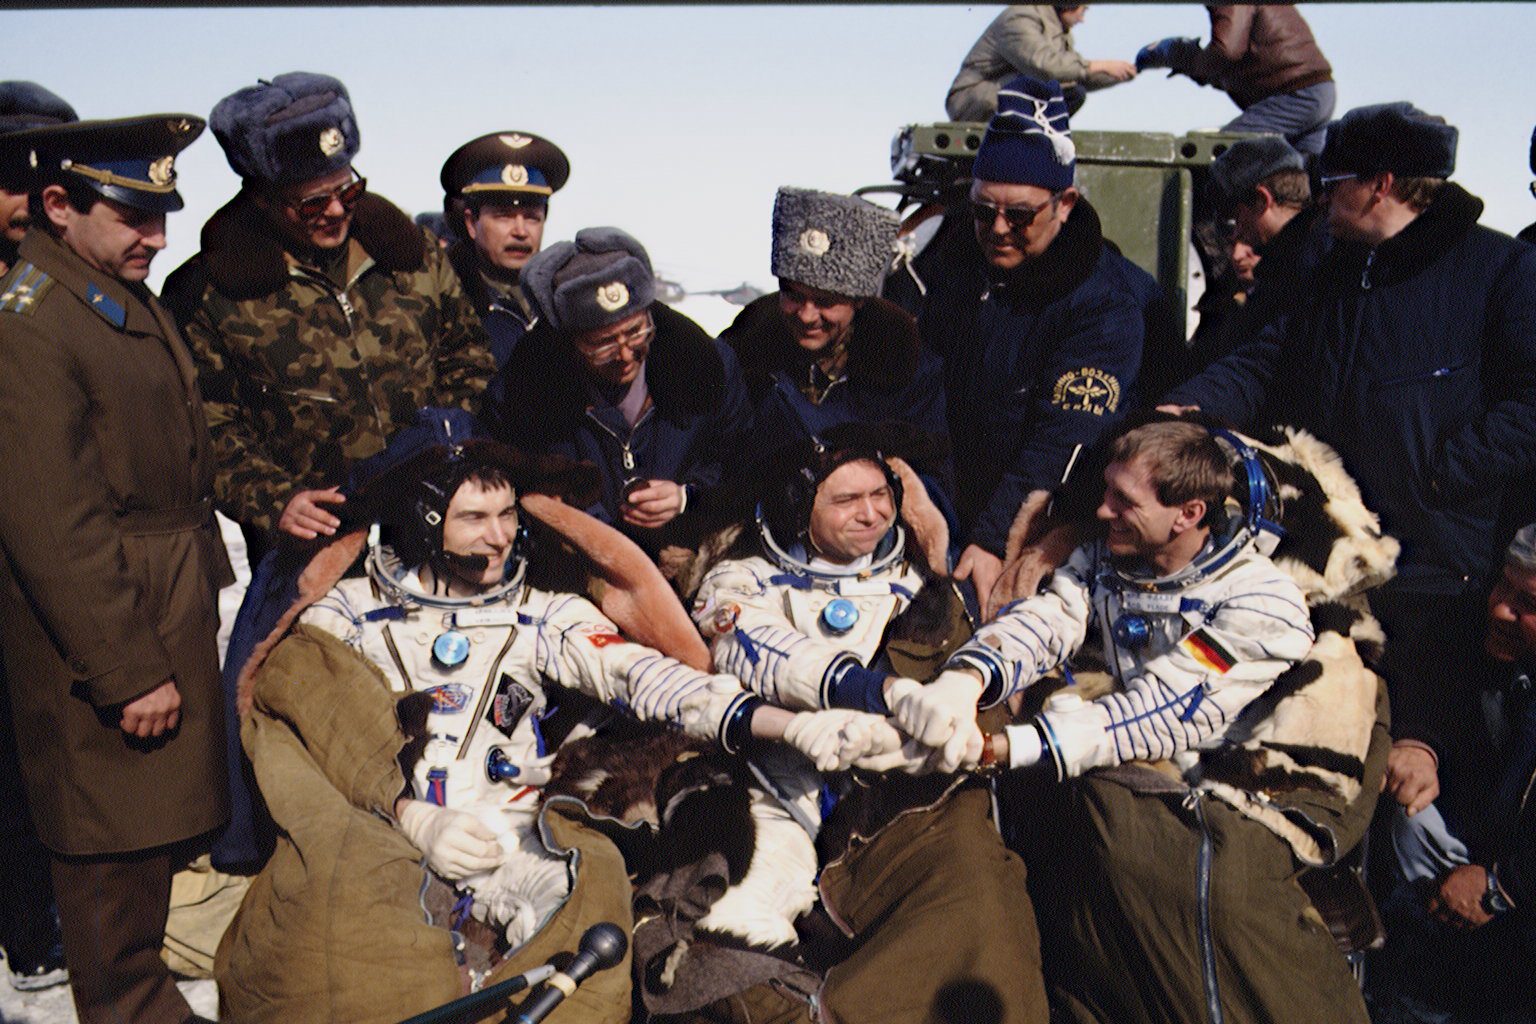 Astronaut Krikalev (left) returns to earth. (Georges DeKeerle/Sygma/Getty Images)